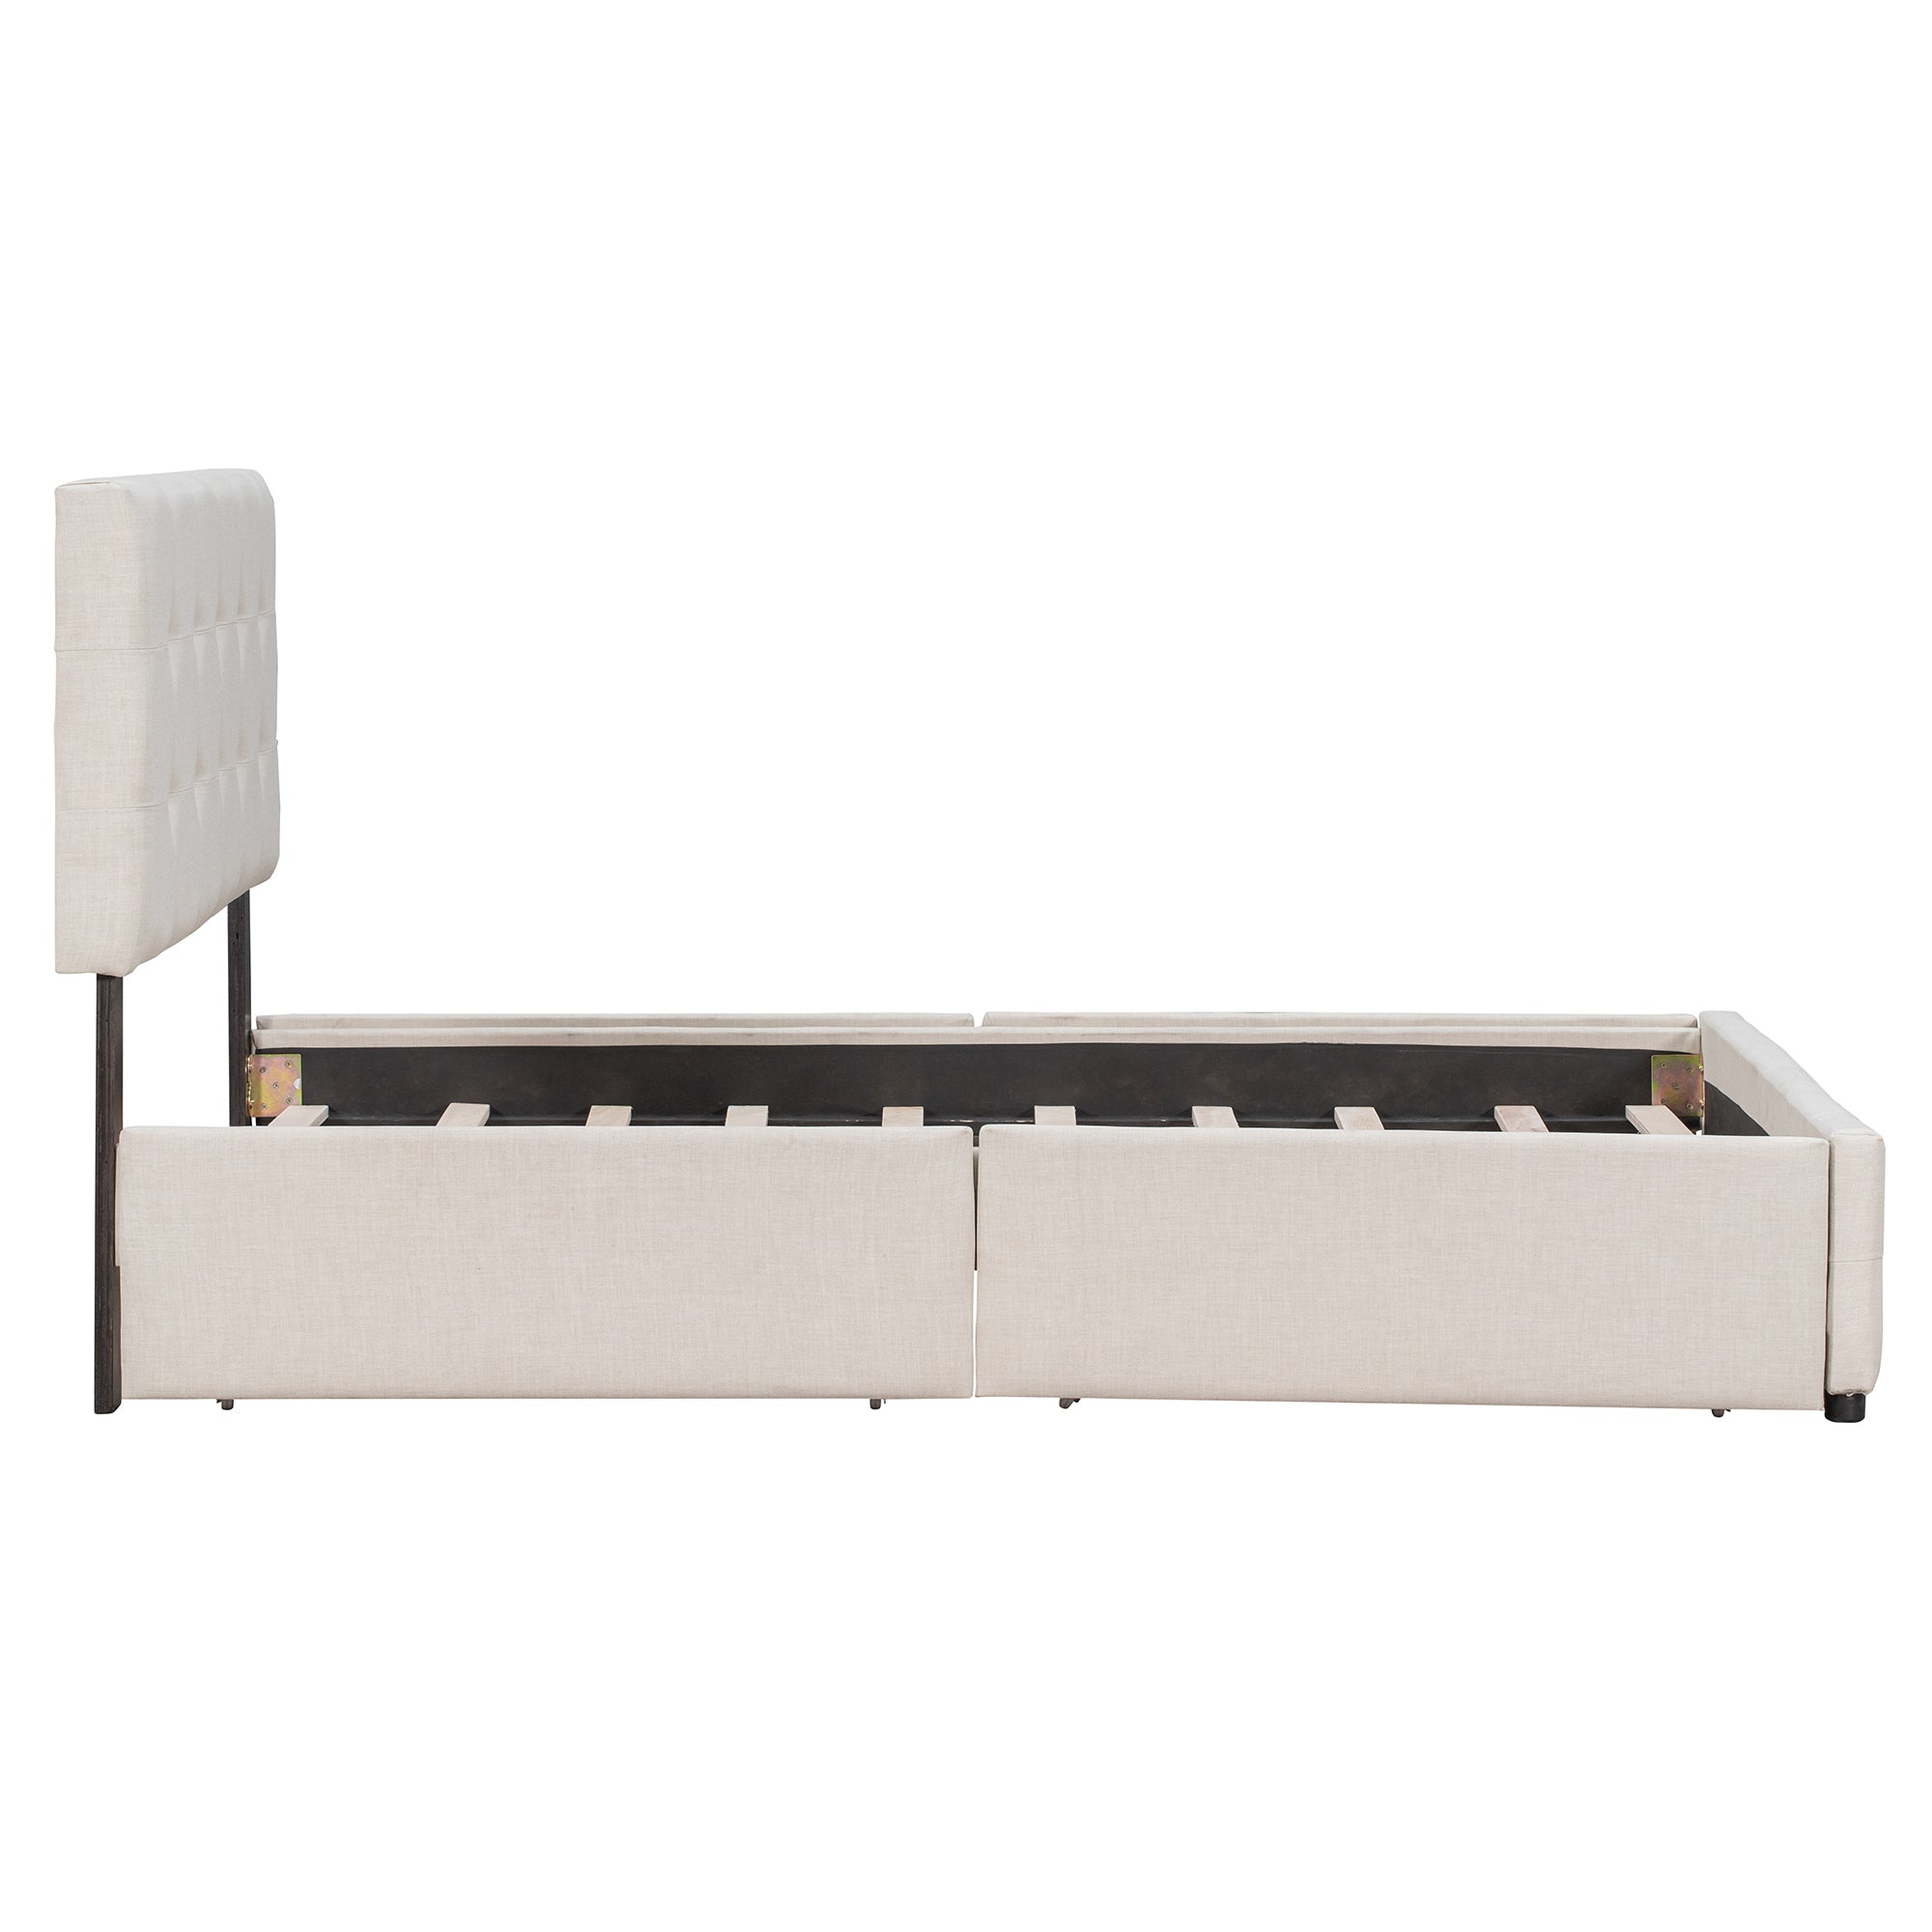 Queen Bed with Classic Headboard and 4 Drawers - Beige